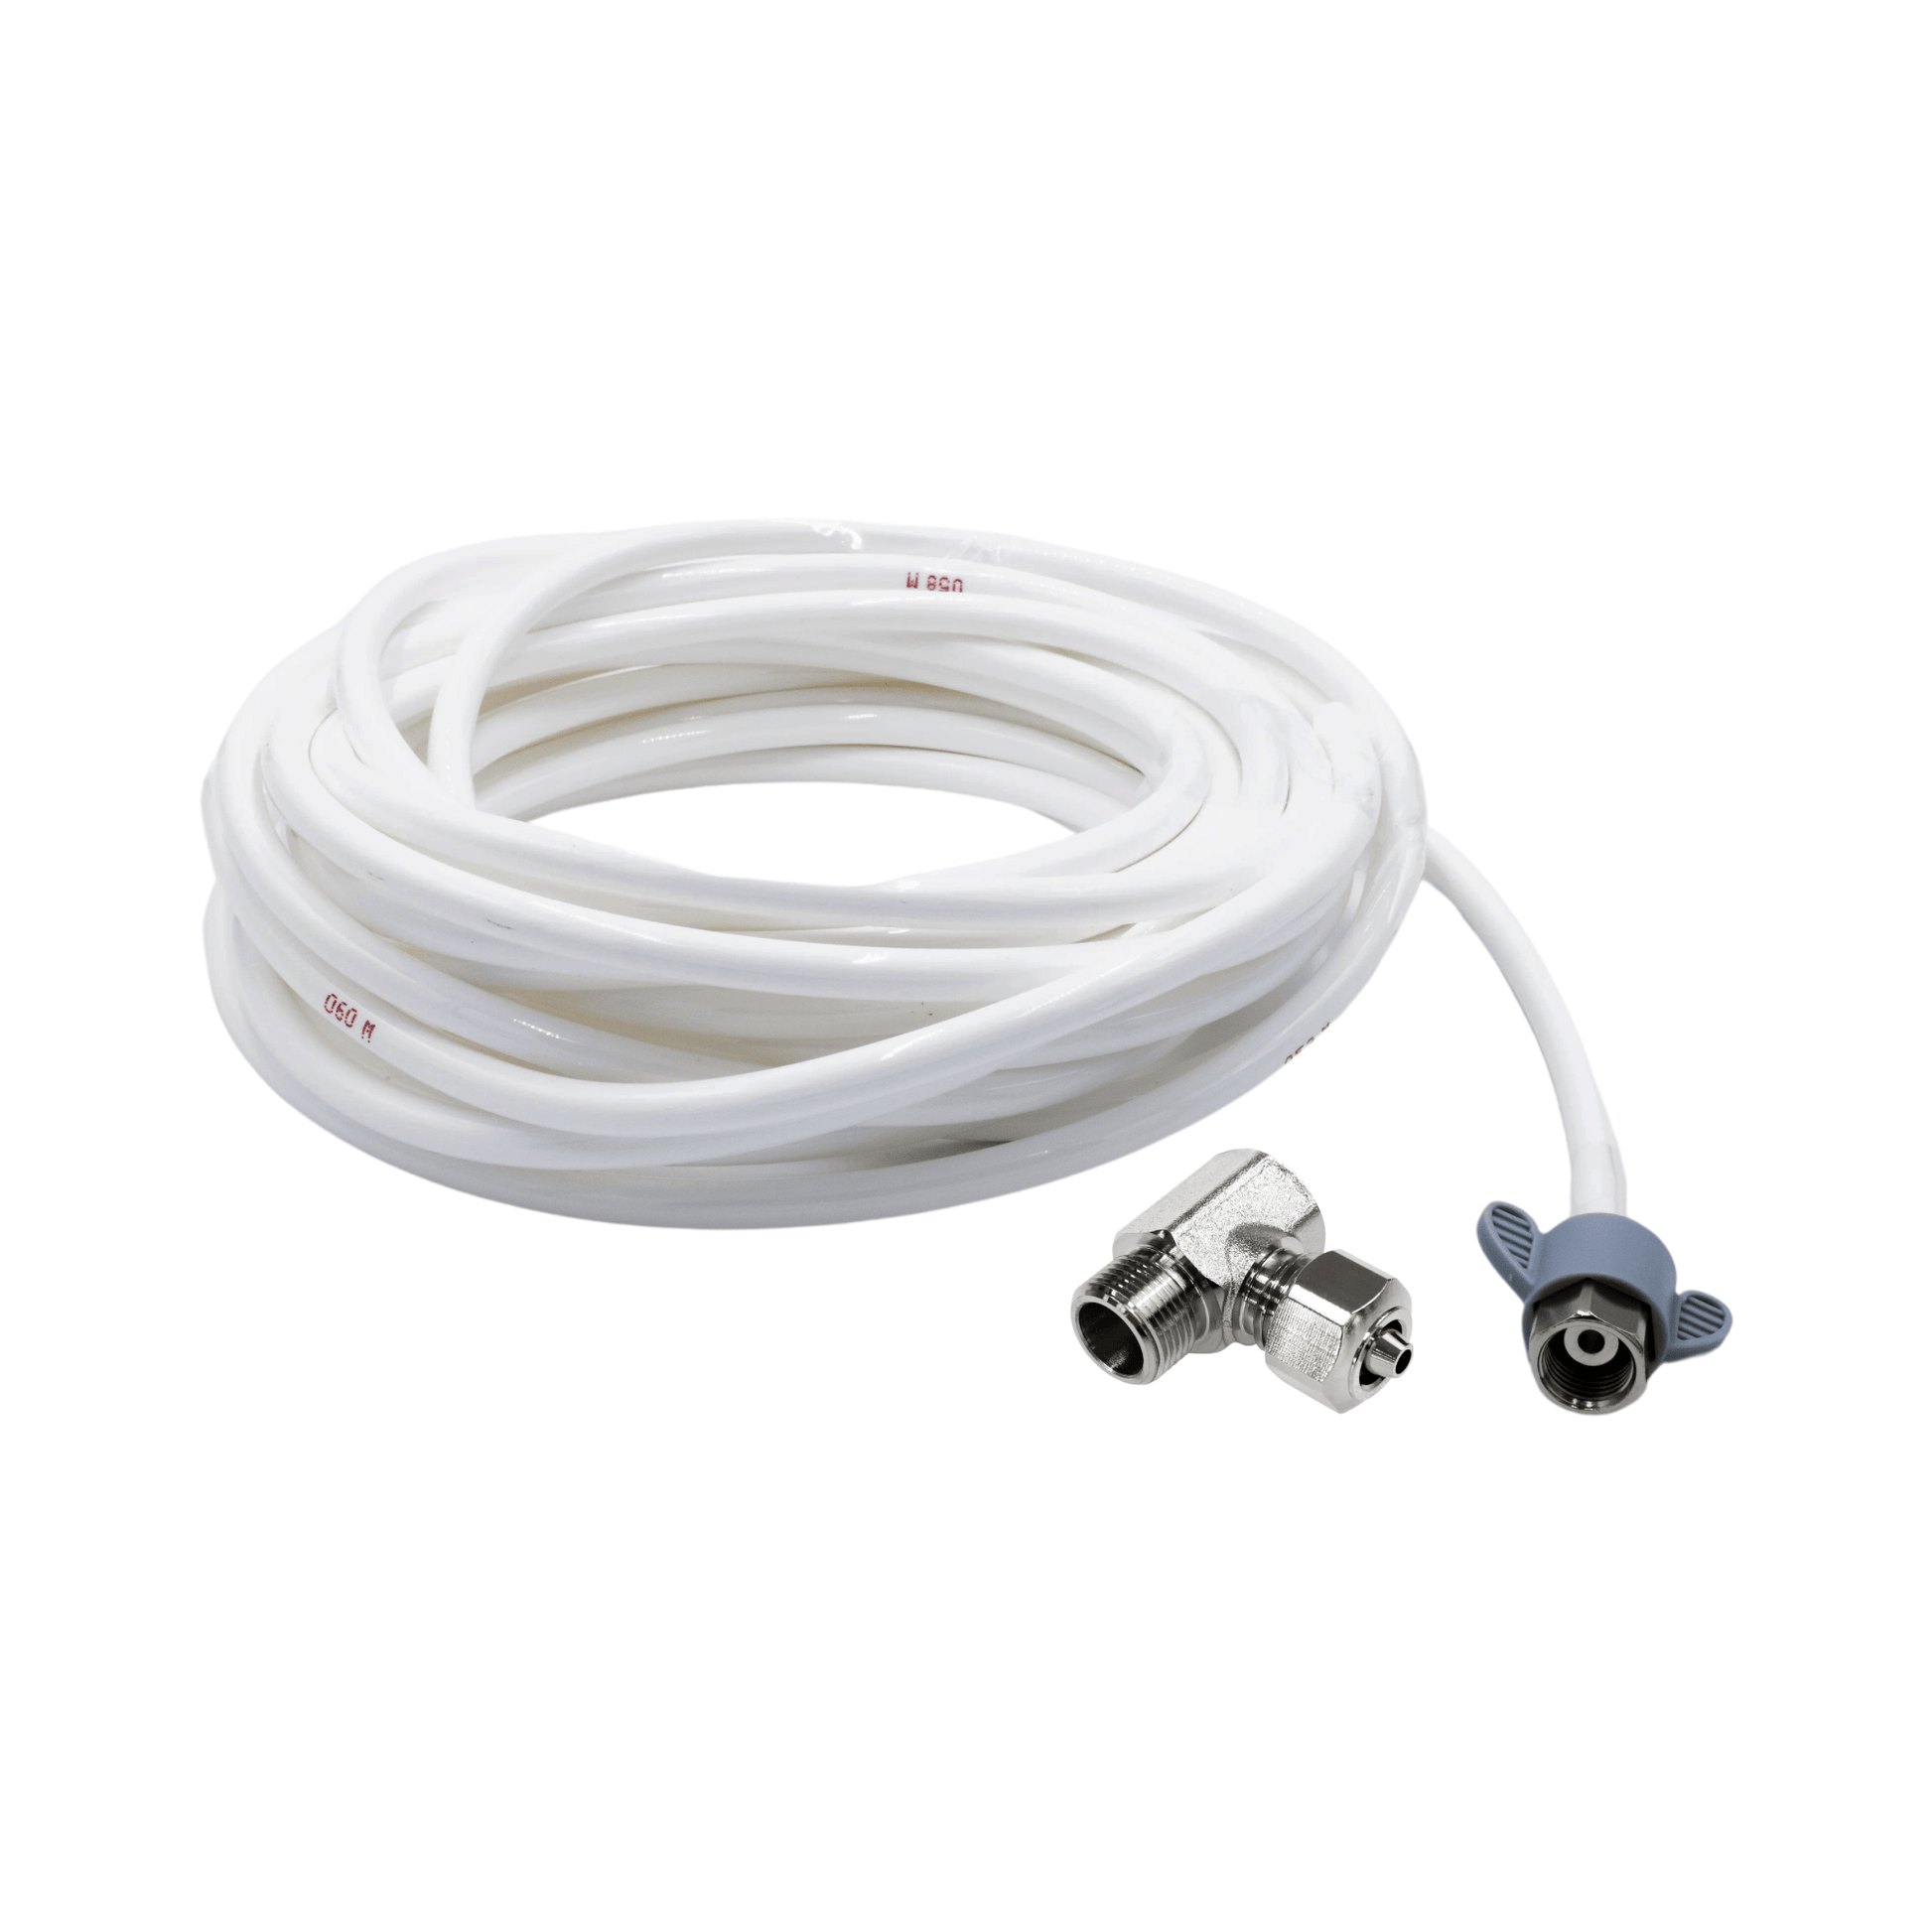 NEO Plus Kit: Alternative Installation for 3/8" Supply Valves- 32ft Plastic Hot Water Hose with 3/8" Metal Shut-off T-Adapter